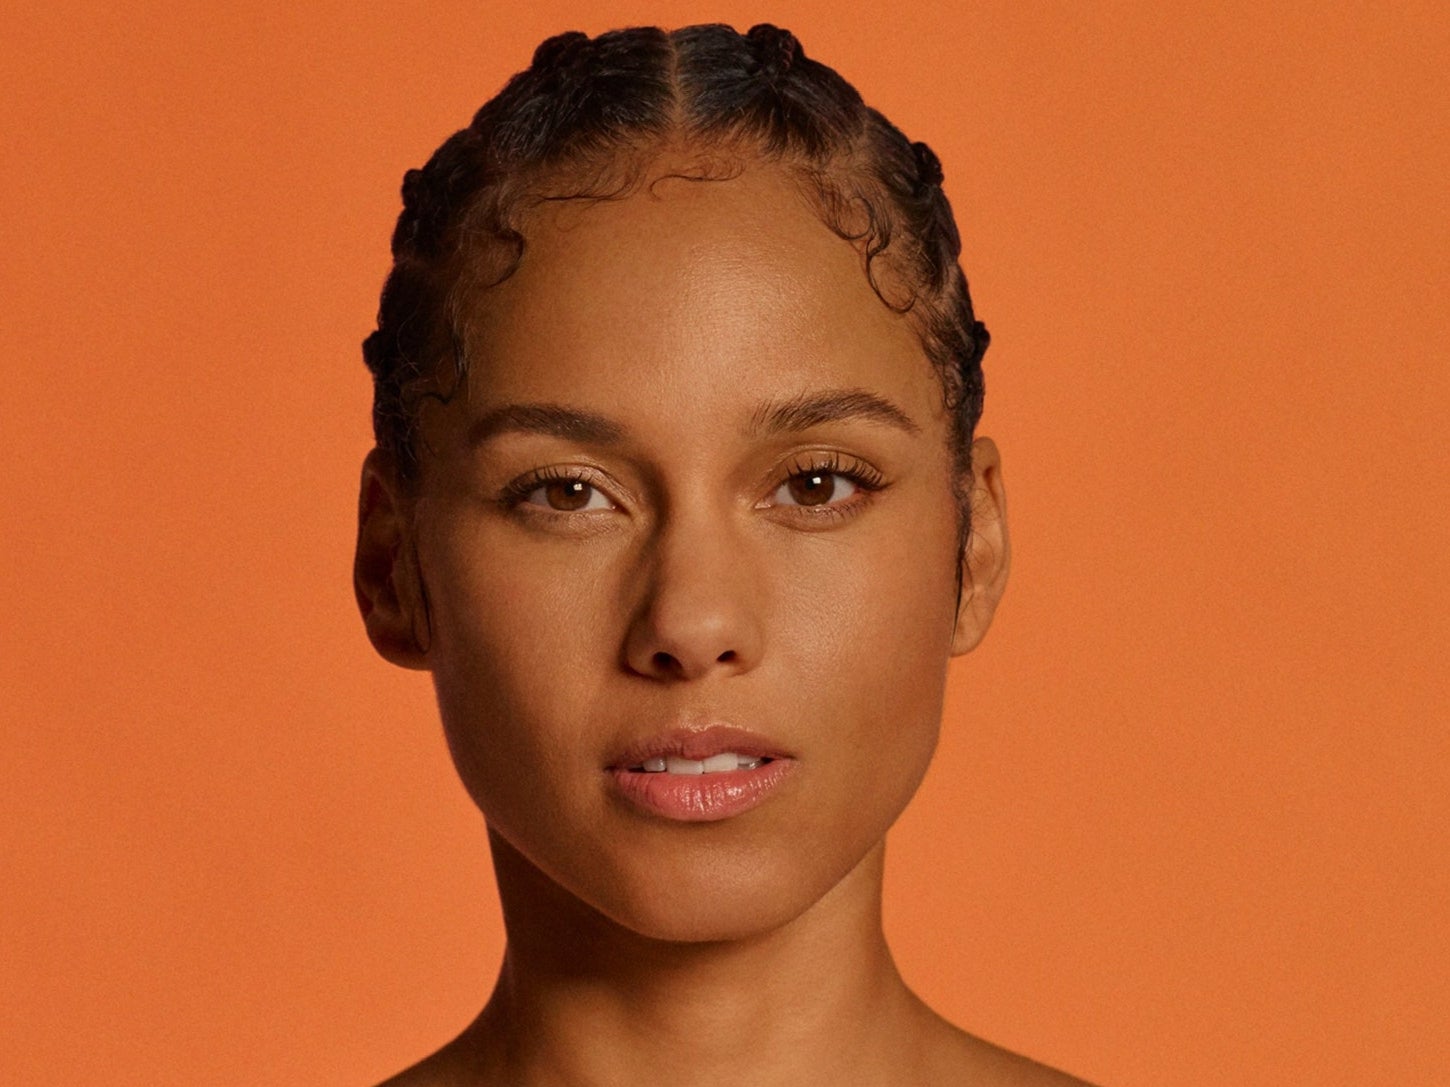 Alicia Keys review, ALICIA: Self-titled album shows singer rattling between  a range of identities